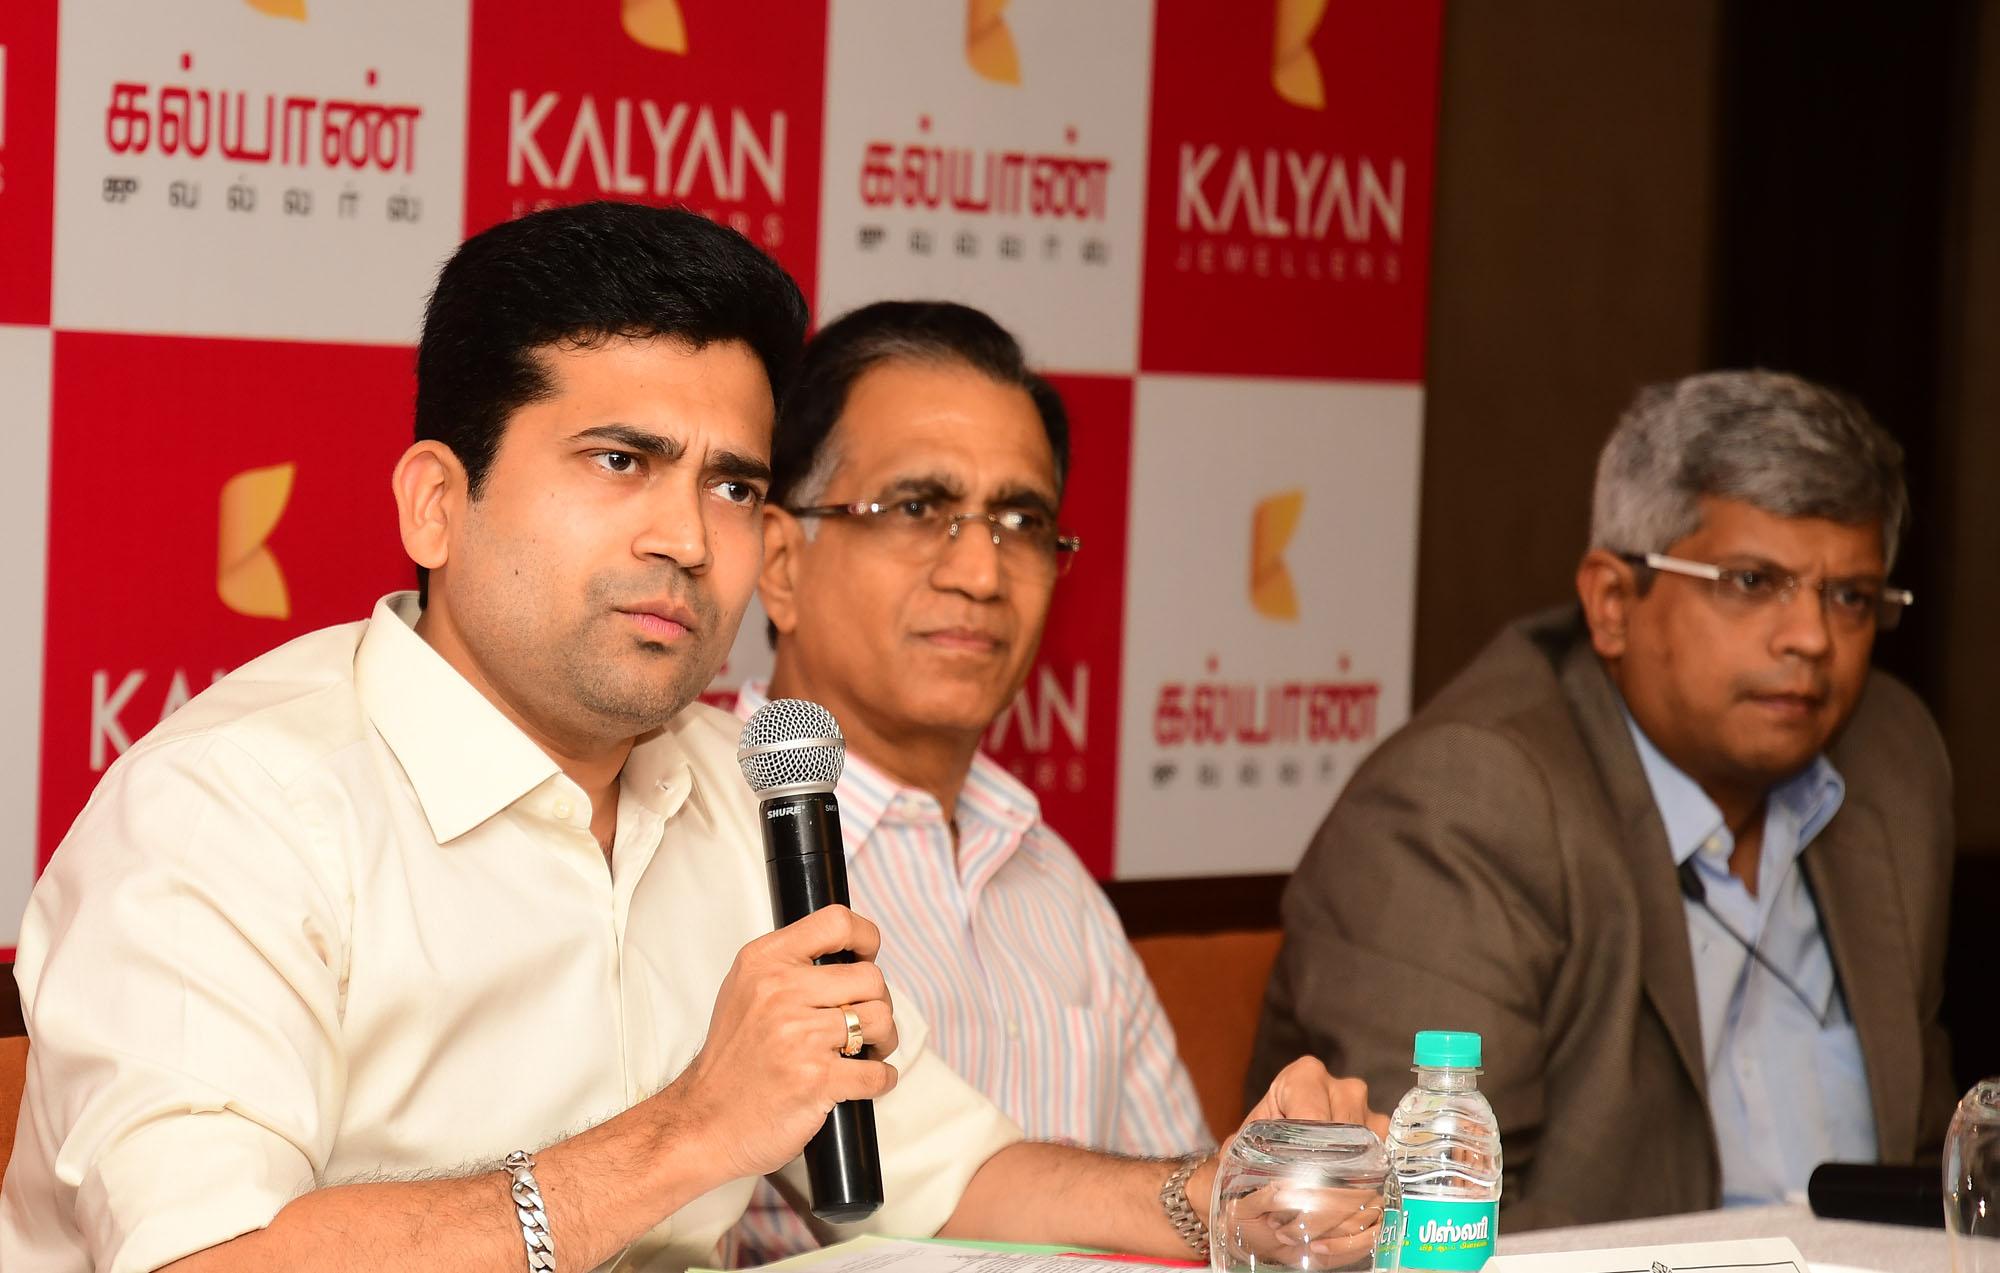 Kalyan jewellers to expand south india presence with rs. 300 crore investment